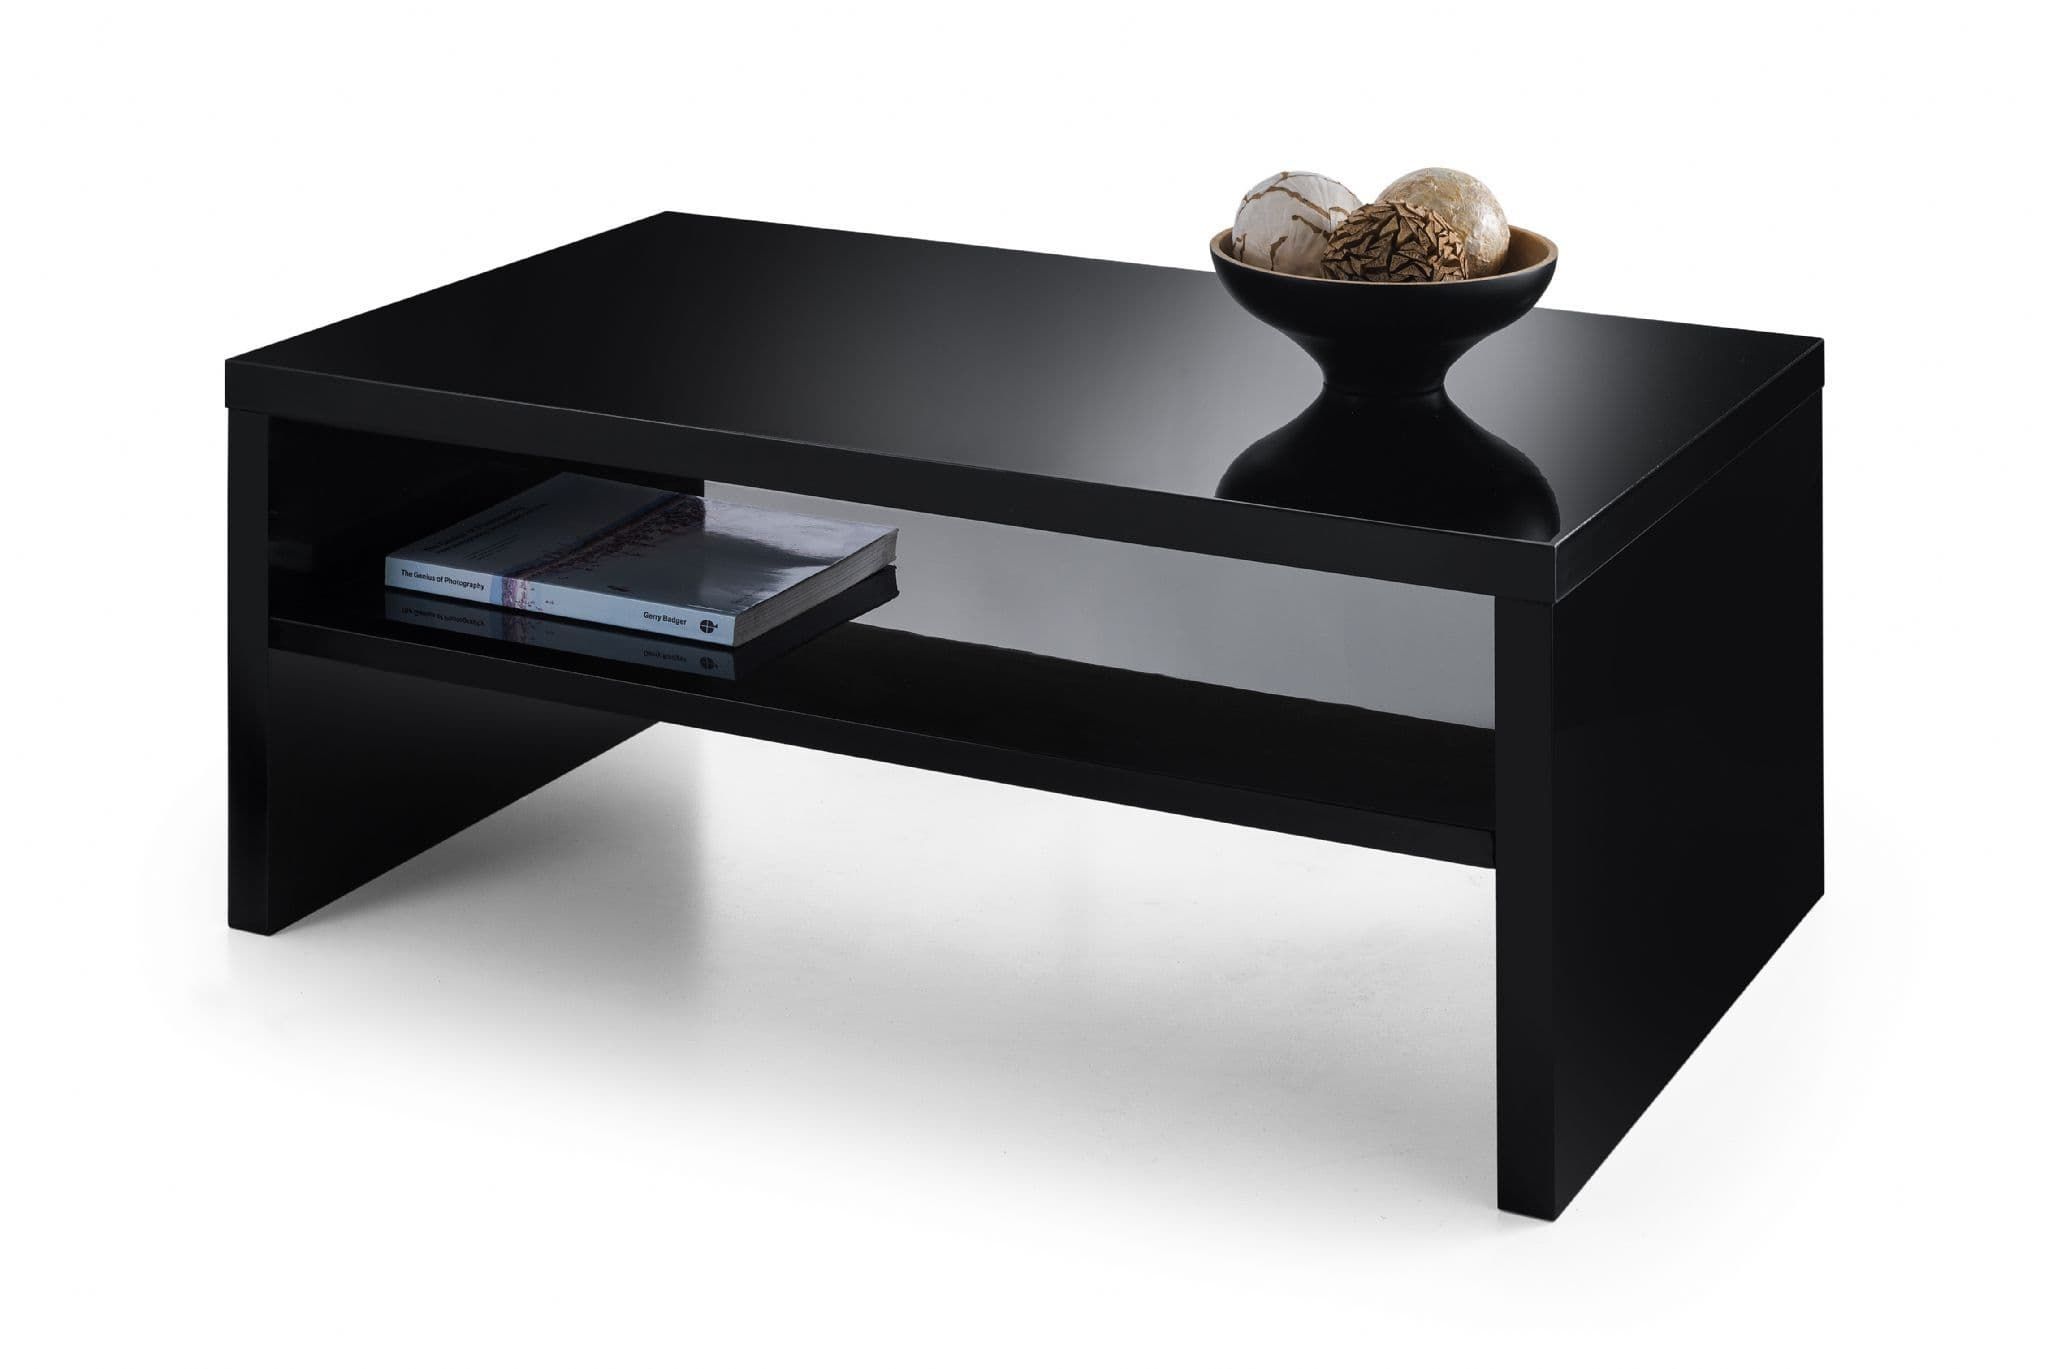 Algeciras Black High Gloss Lacquered Mirror Finish Coffee Table Jb337 Pertaining To High Gloss Black Coffee Tables (Photo 4 of 15)